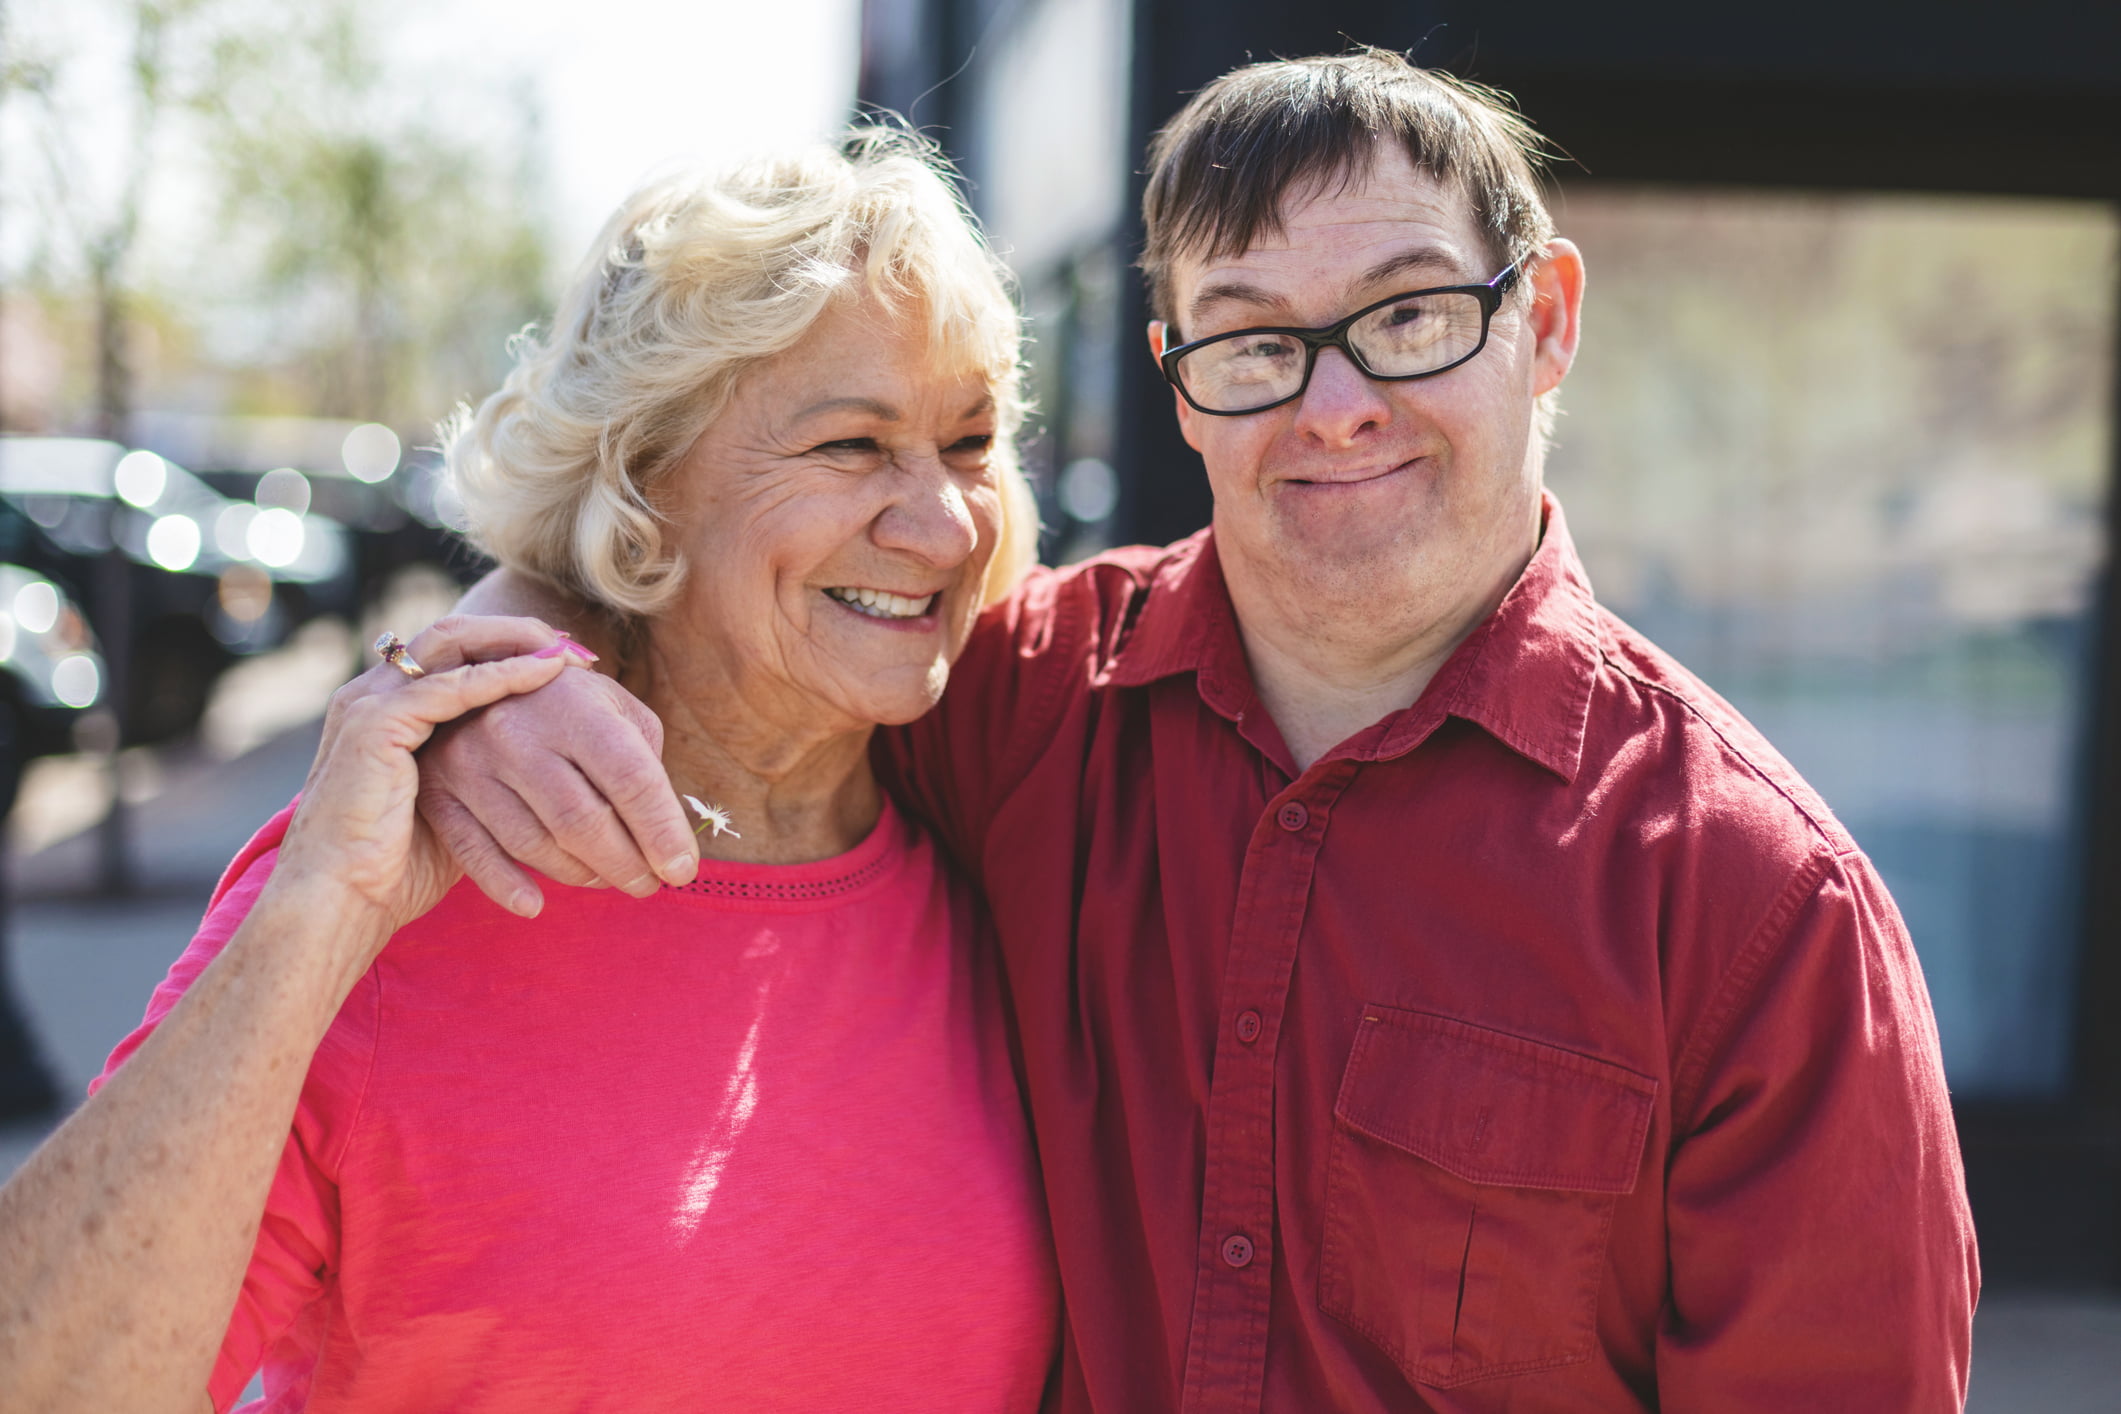 A smiling Down Syndrome man stands with his arm around a smiling older woman.